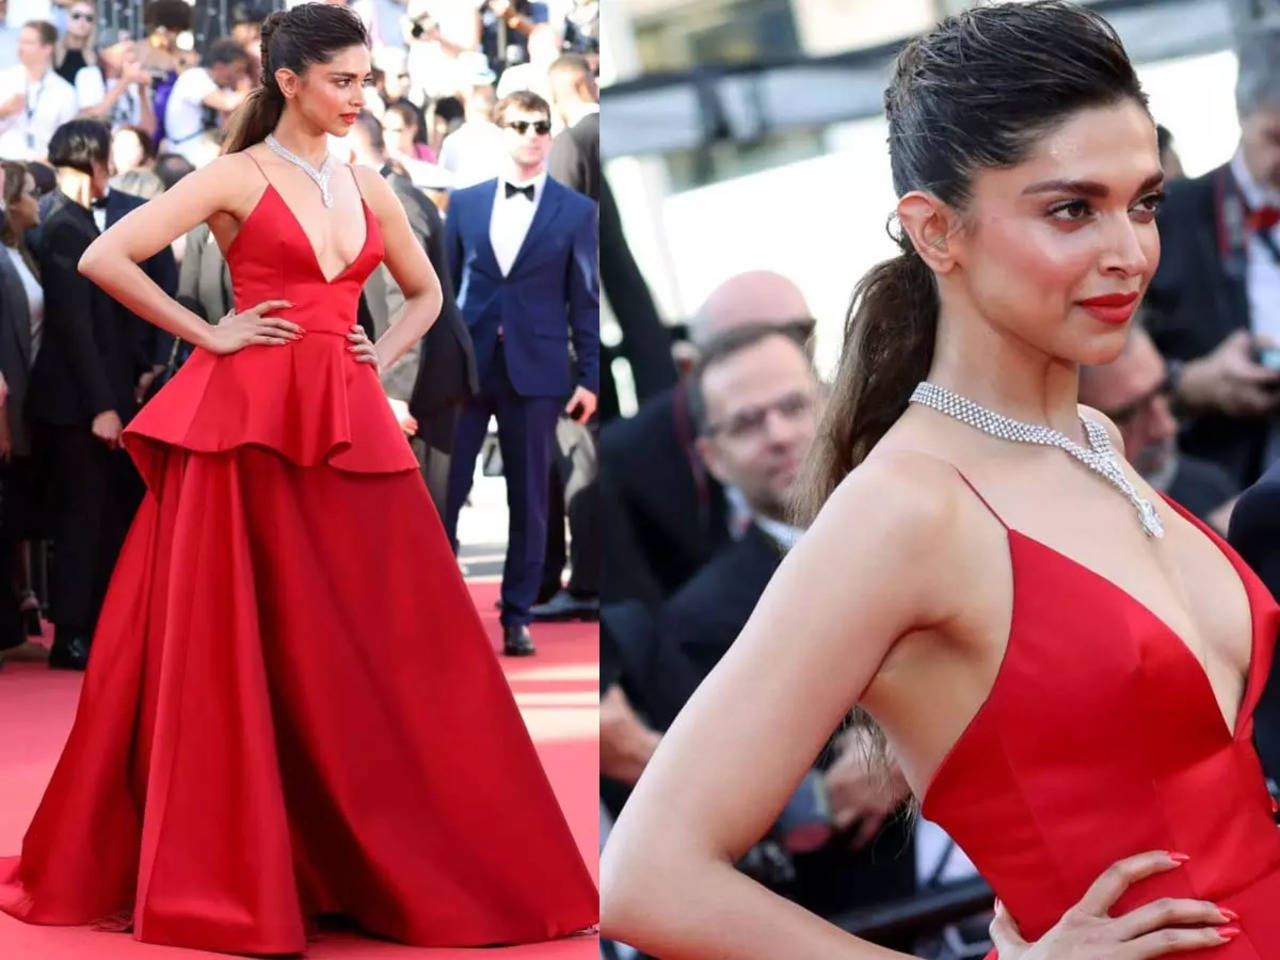 Deepika Padukone drops new pics of Cannes Day 3 look in Louis Vuitton: See  here